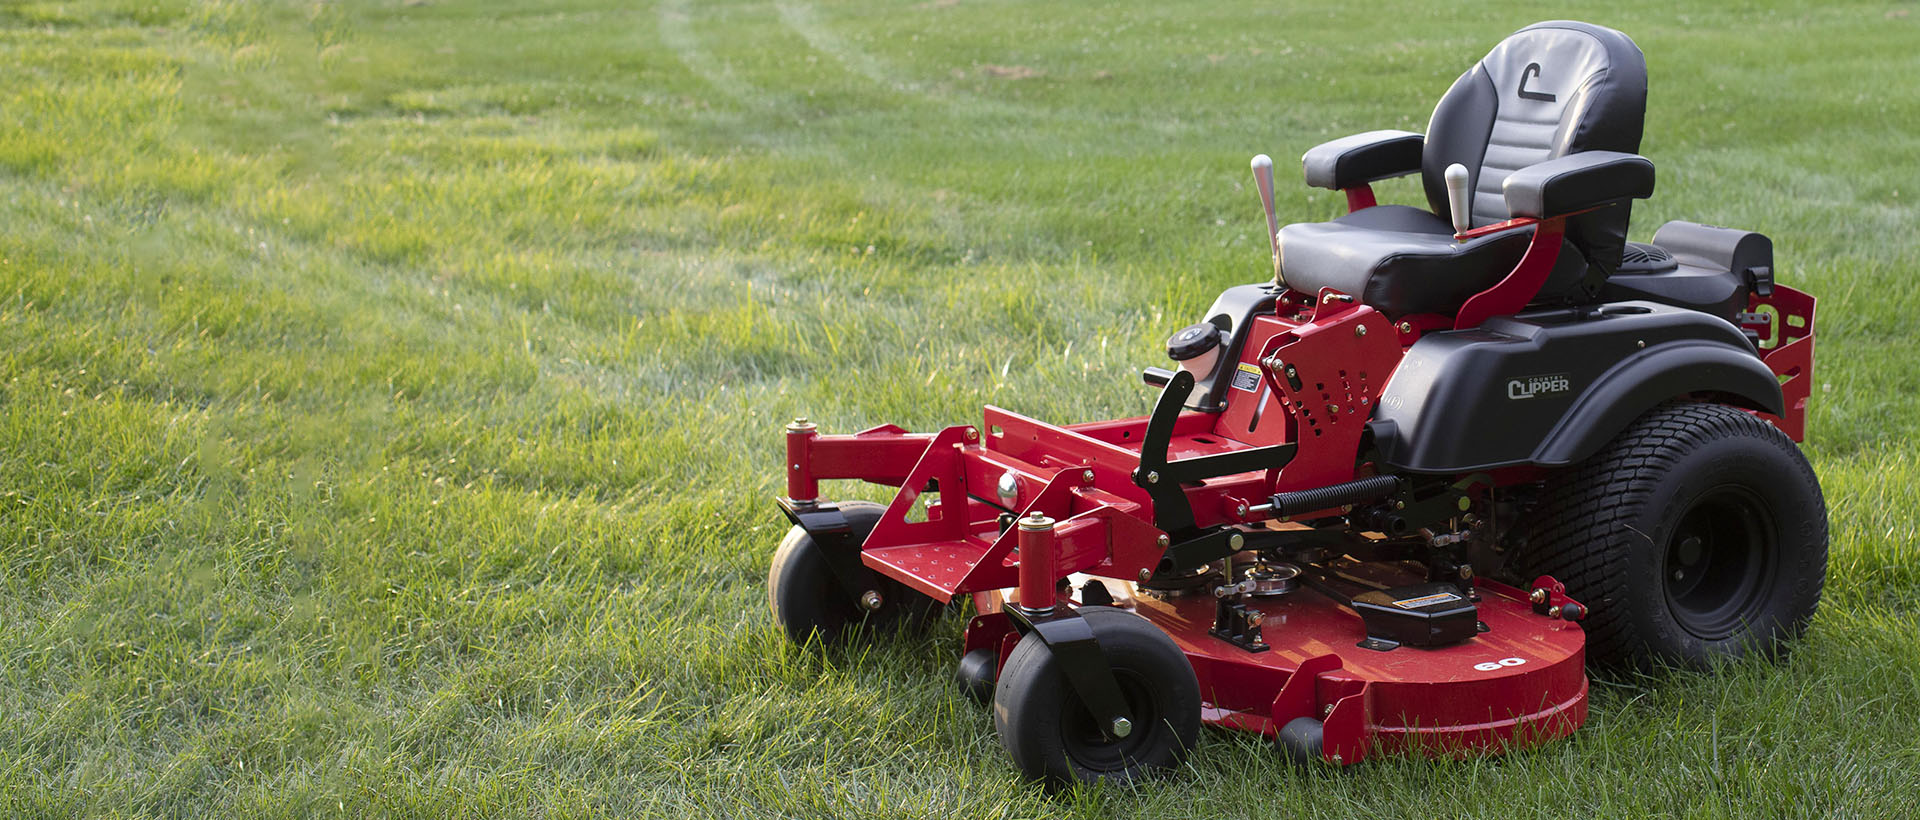 Country Clipper zero-turn mower with joystick steering in a grass field.